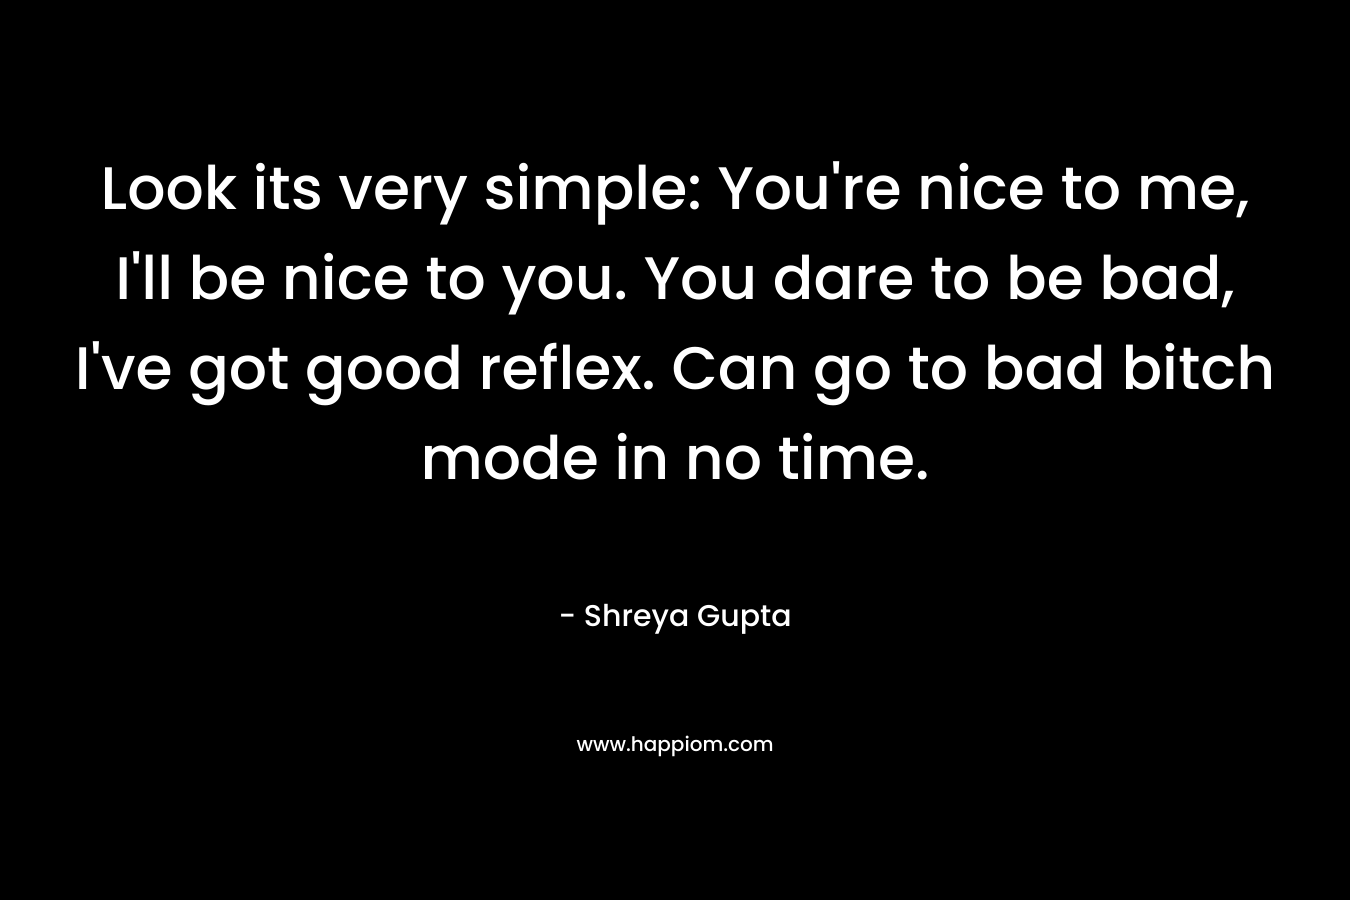 Look its very simple: You’re nice to me, I’ll be nice to you. You dare to be bad, I’ve got good reflex. Can go to bad bitch mode in no time. – Shreya Gupta